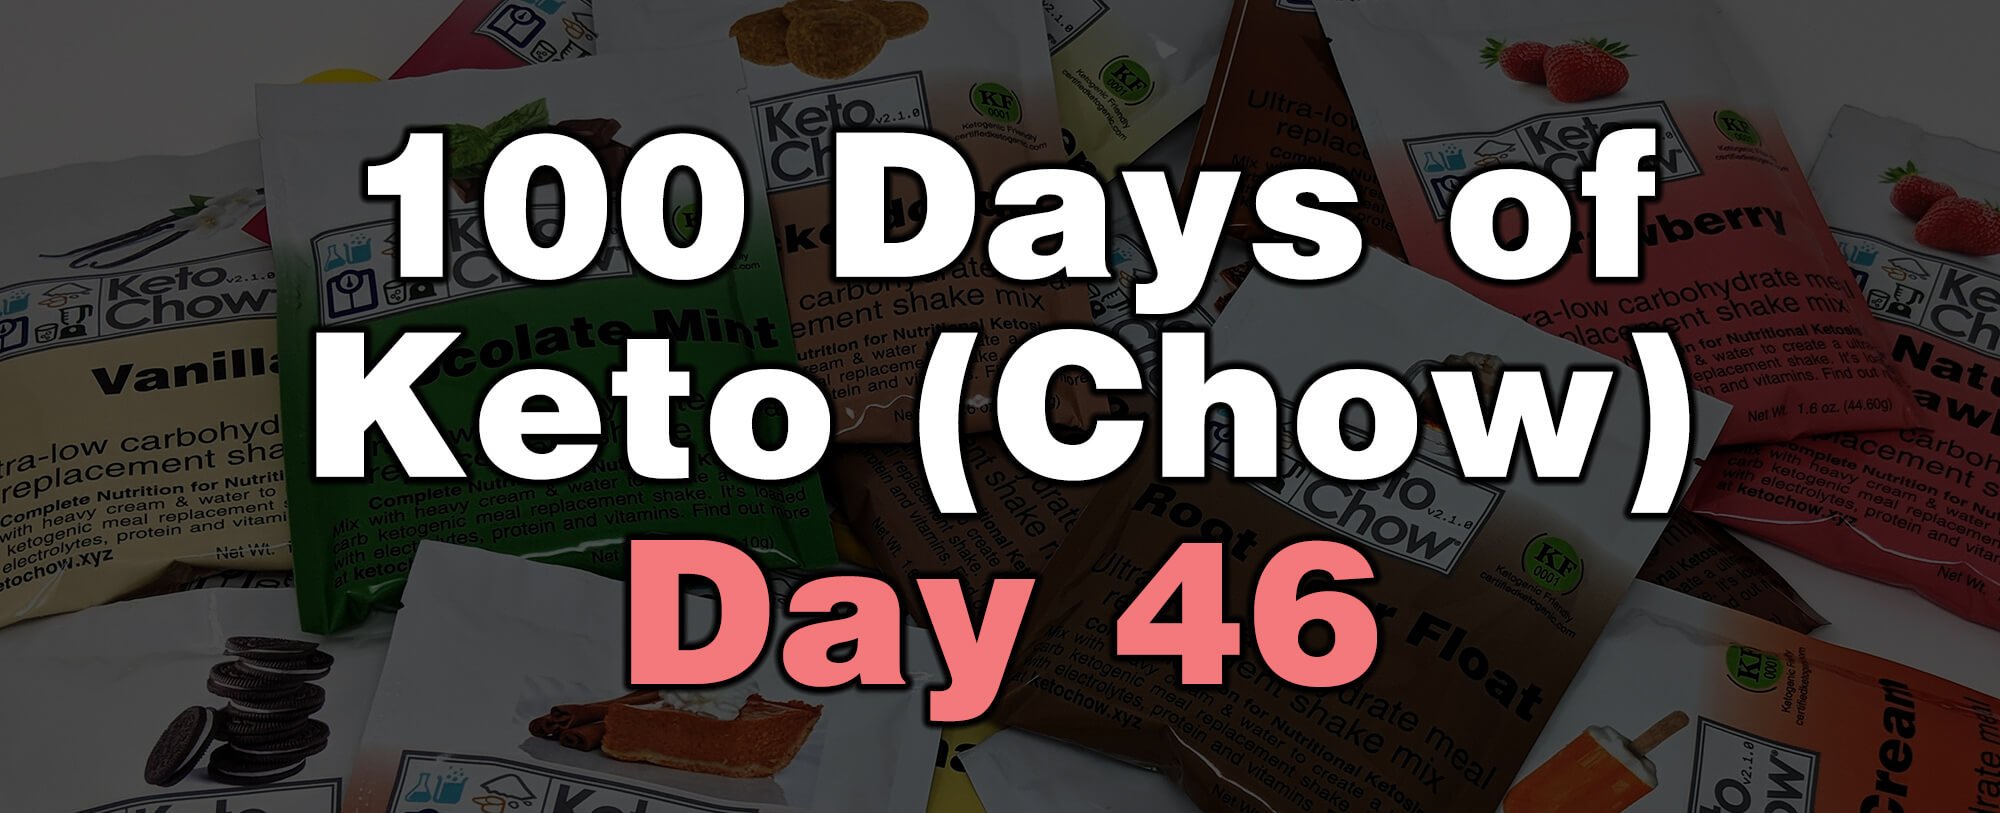 100 days of keto chow day 46